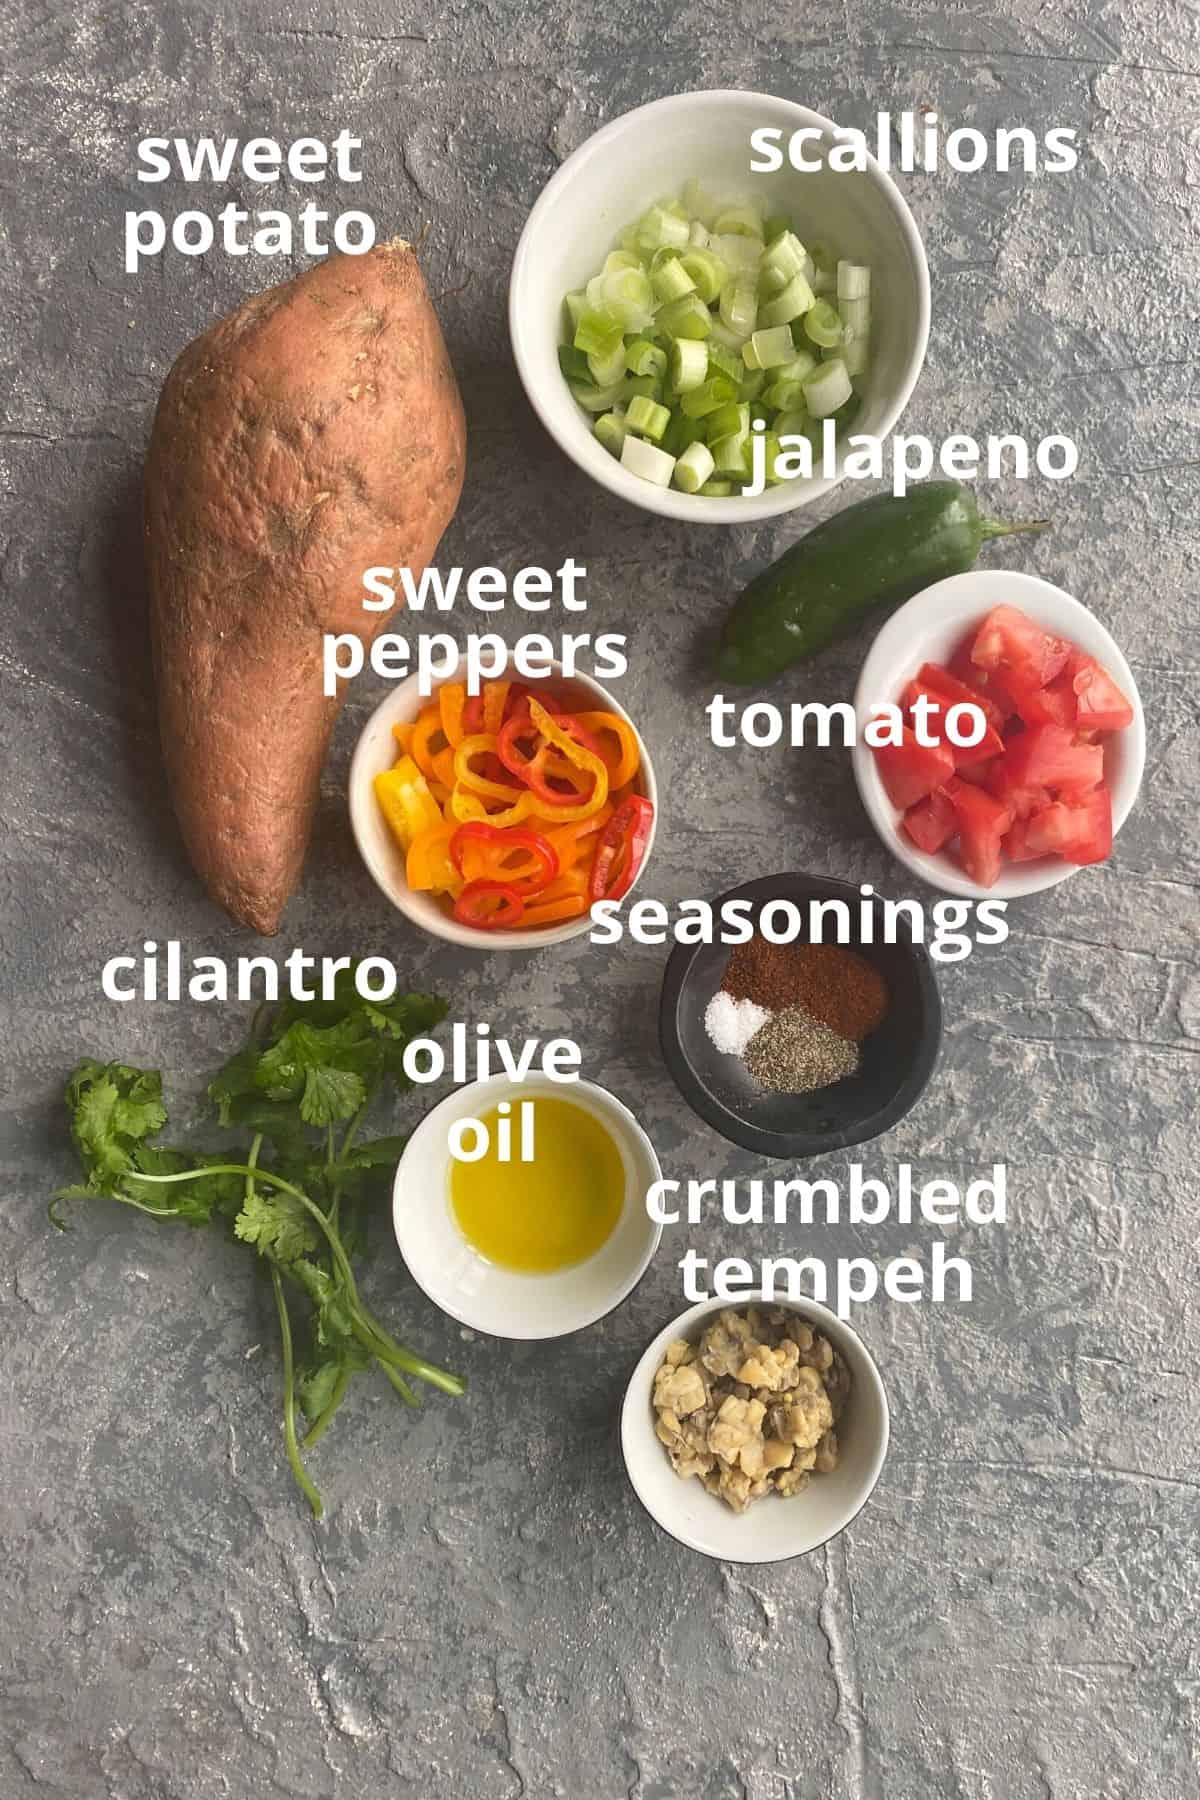 An overhead view of the ingredients to make loaded sweet potato fries; a sweet potato, scallions, tomato, sweet peppers, cilantro, olive oil, seasonings, crumbled tempeh